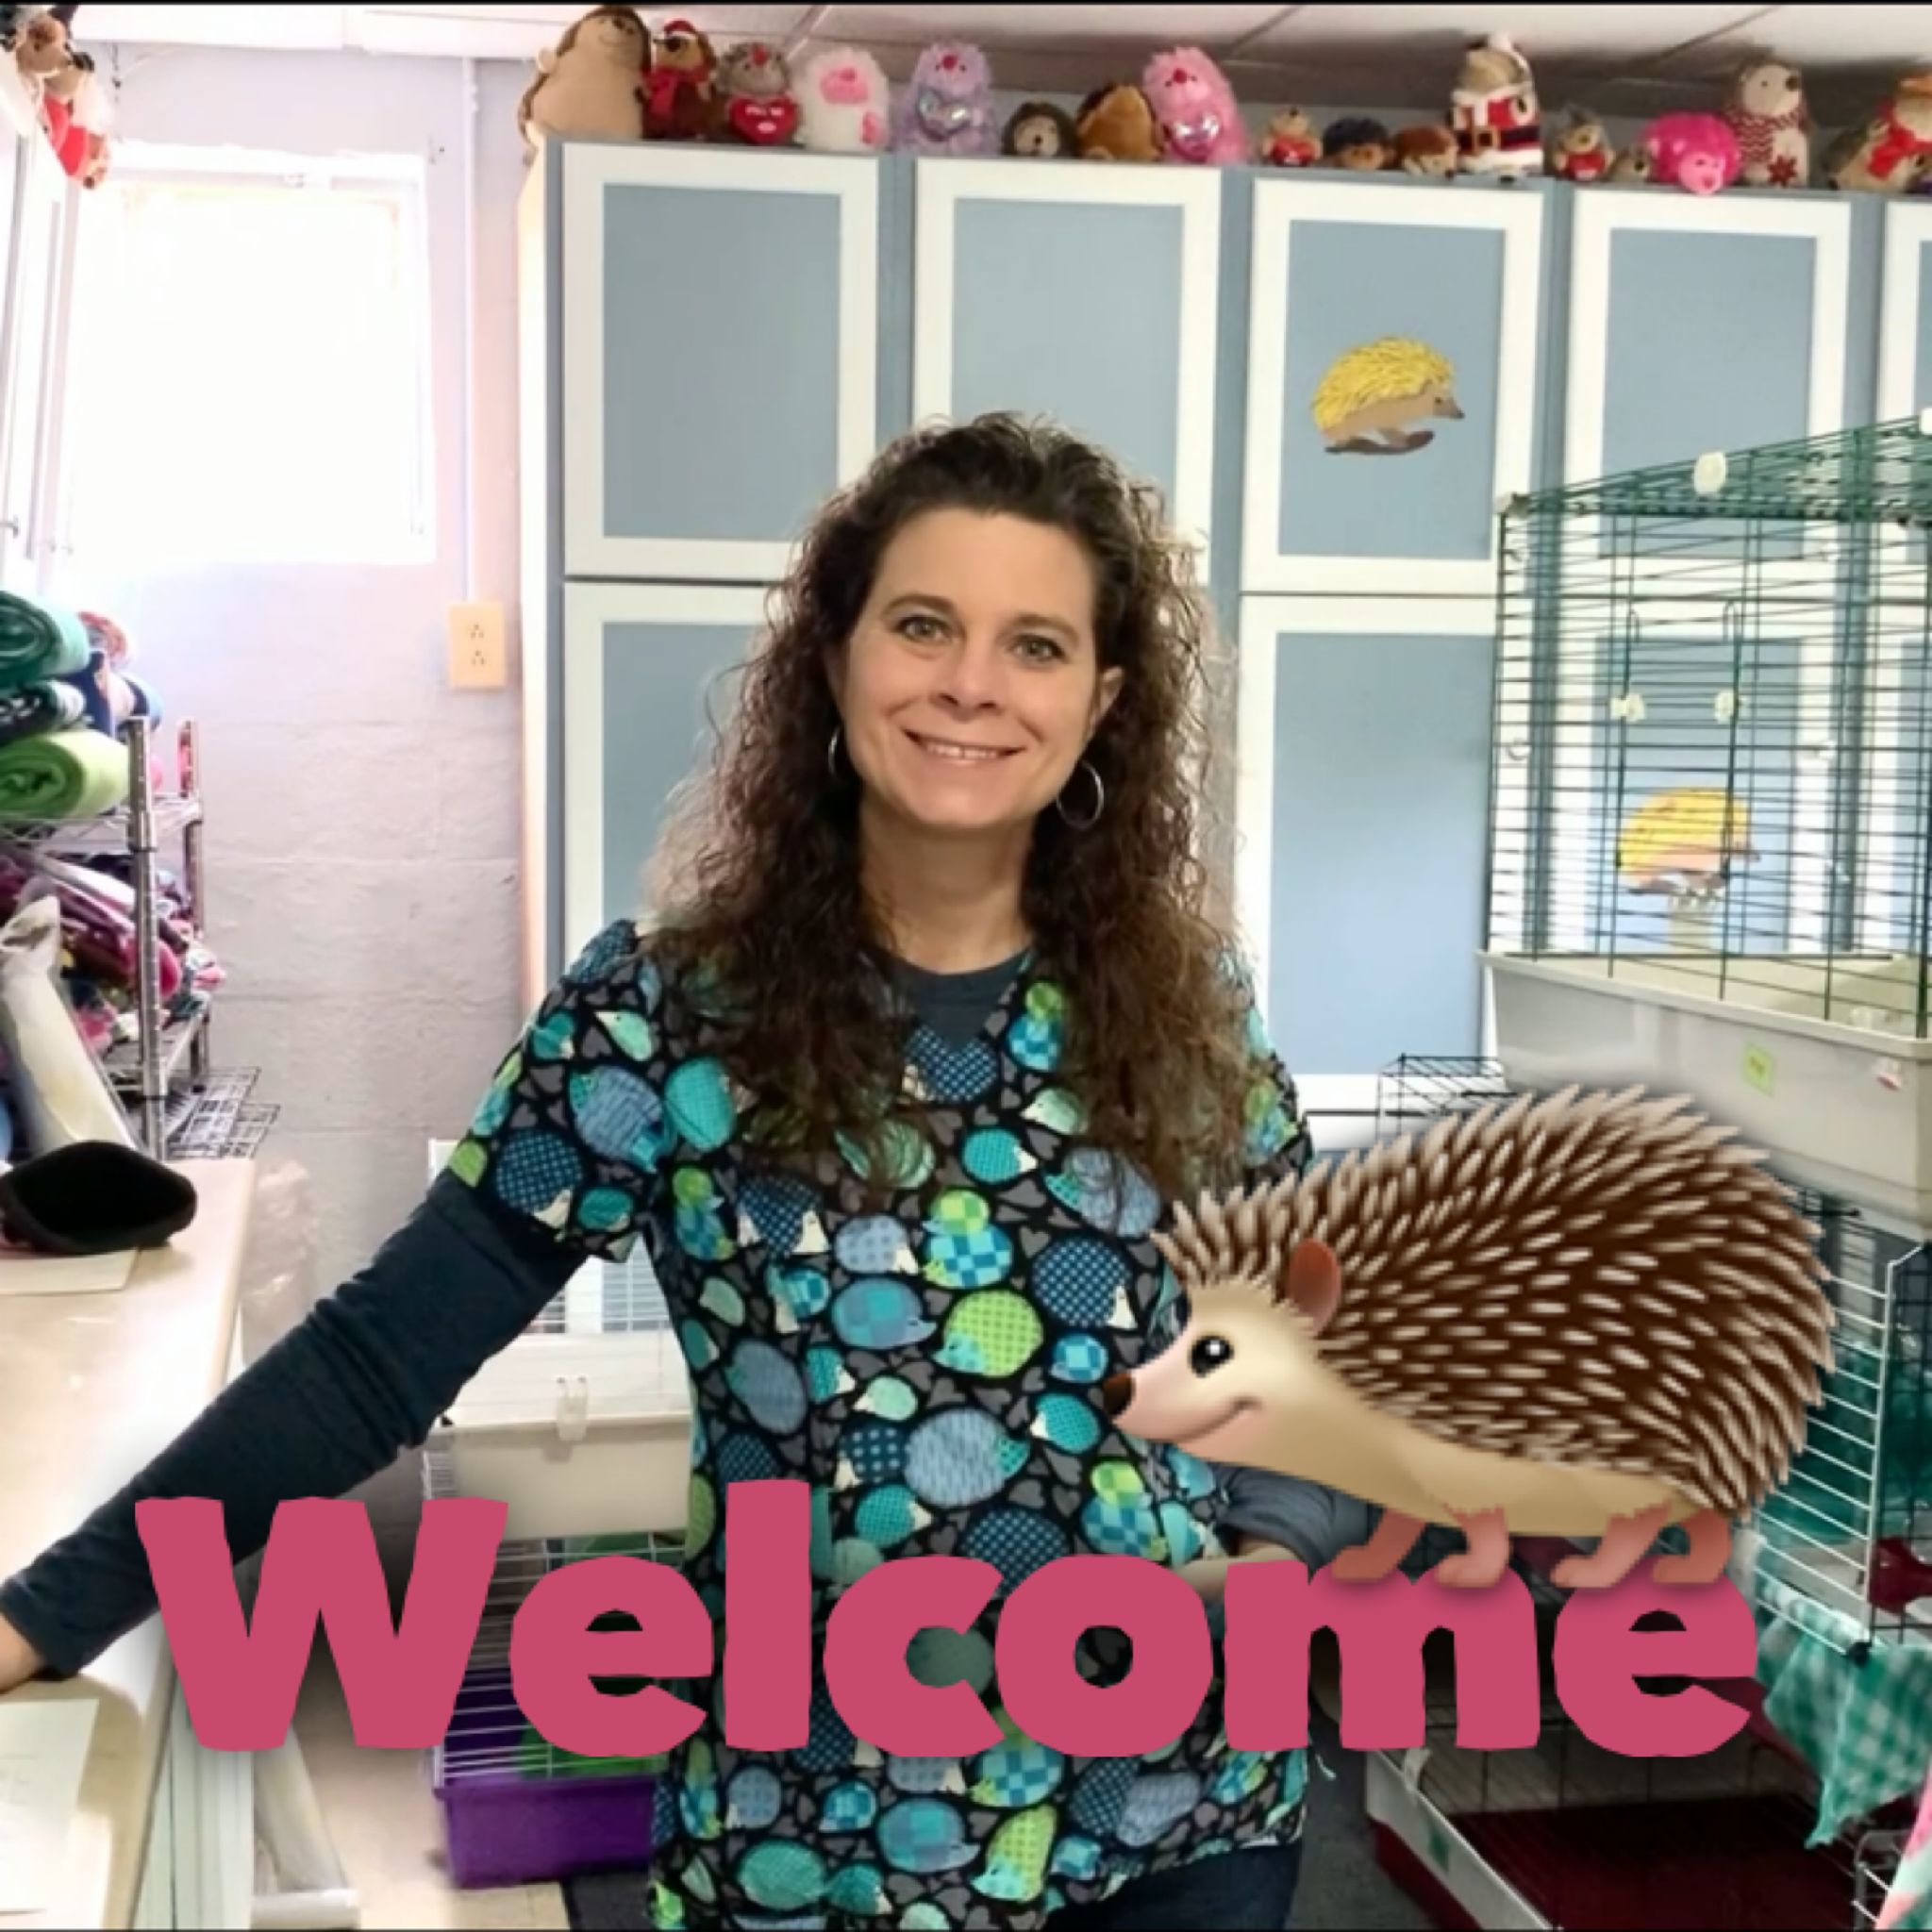 Protected: New Hedgehog Owners: Information and Videos to Watch Before Your Appointment at Our Shop.